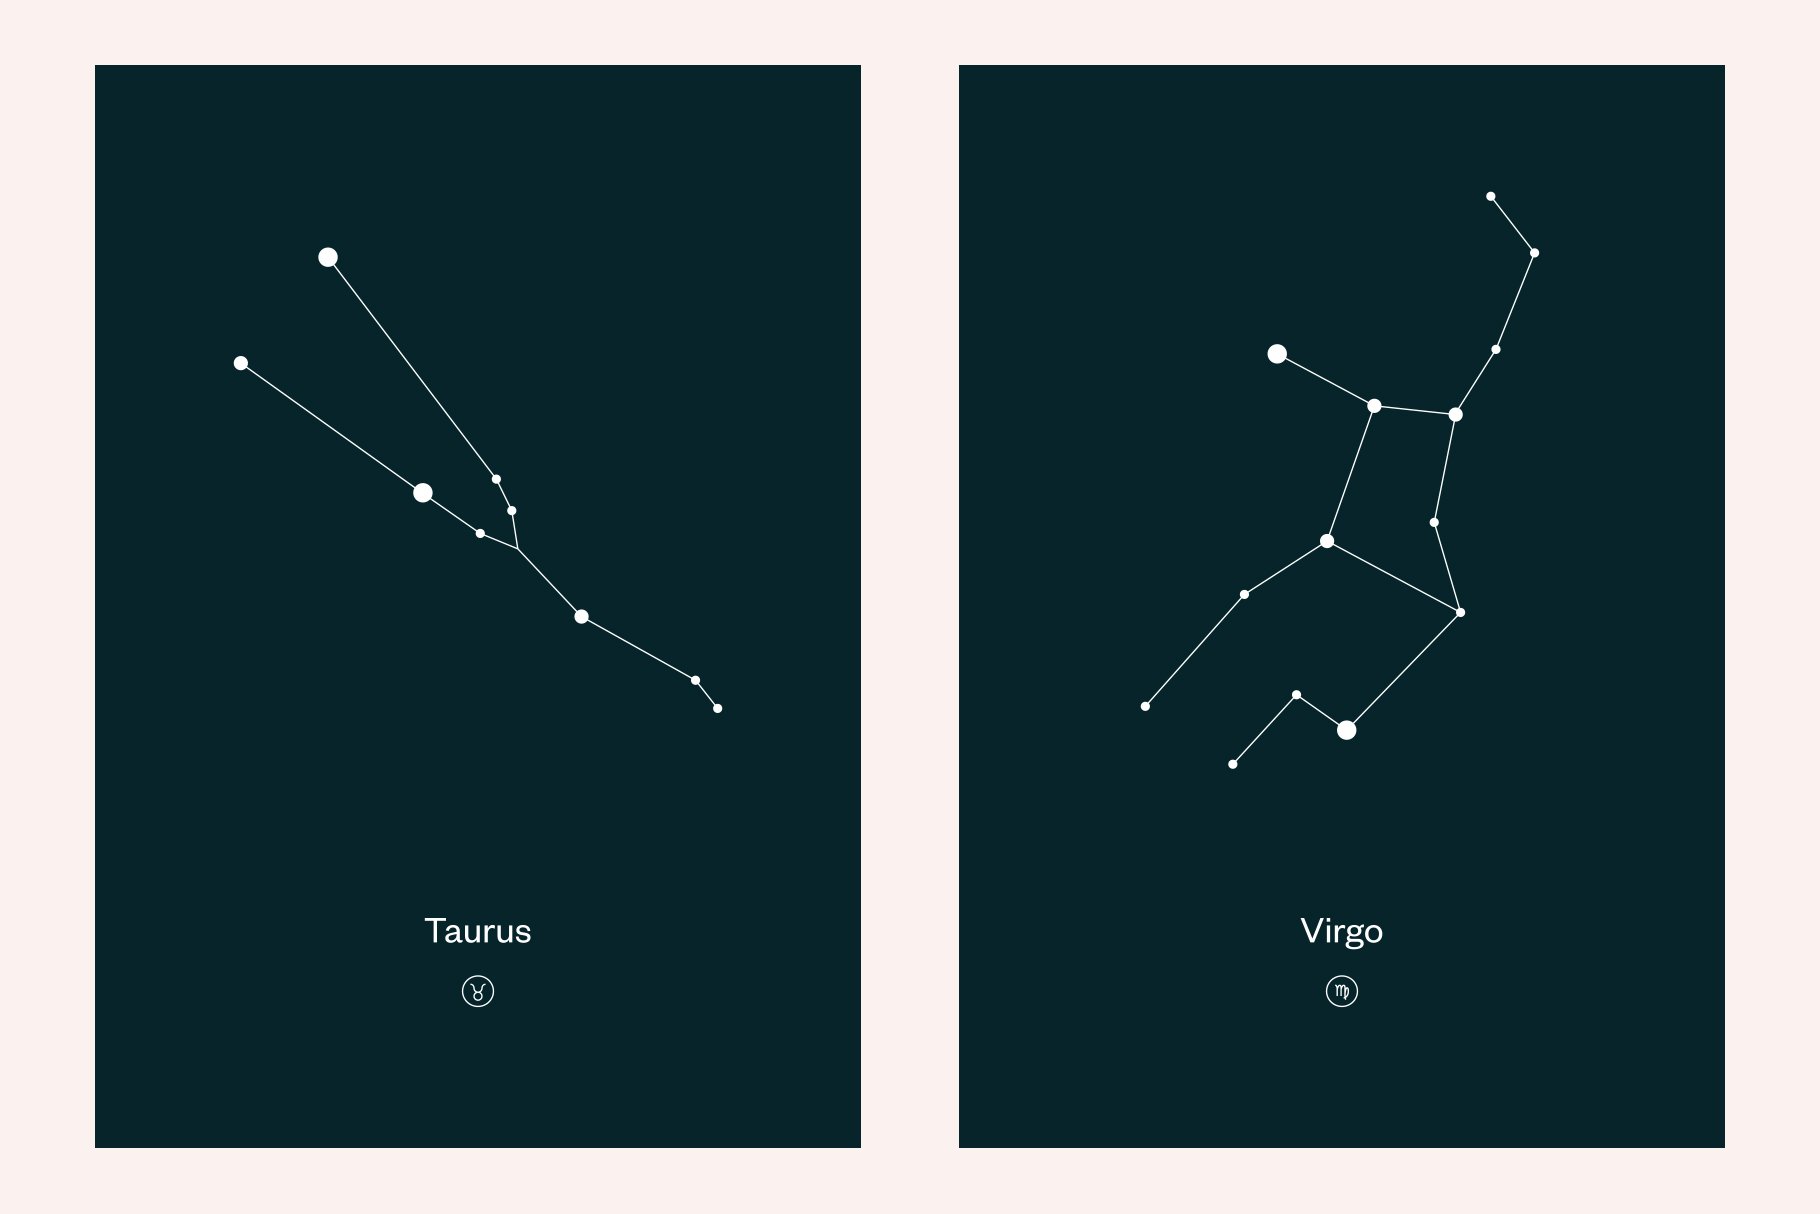 Two astrology composition on the night sky - taurus and virgo.